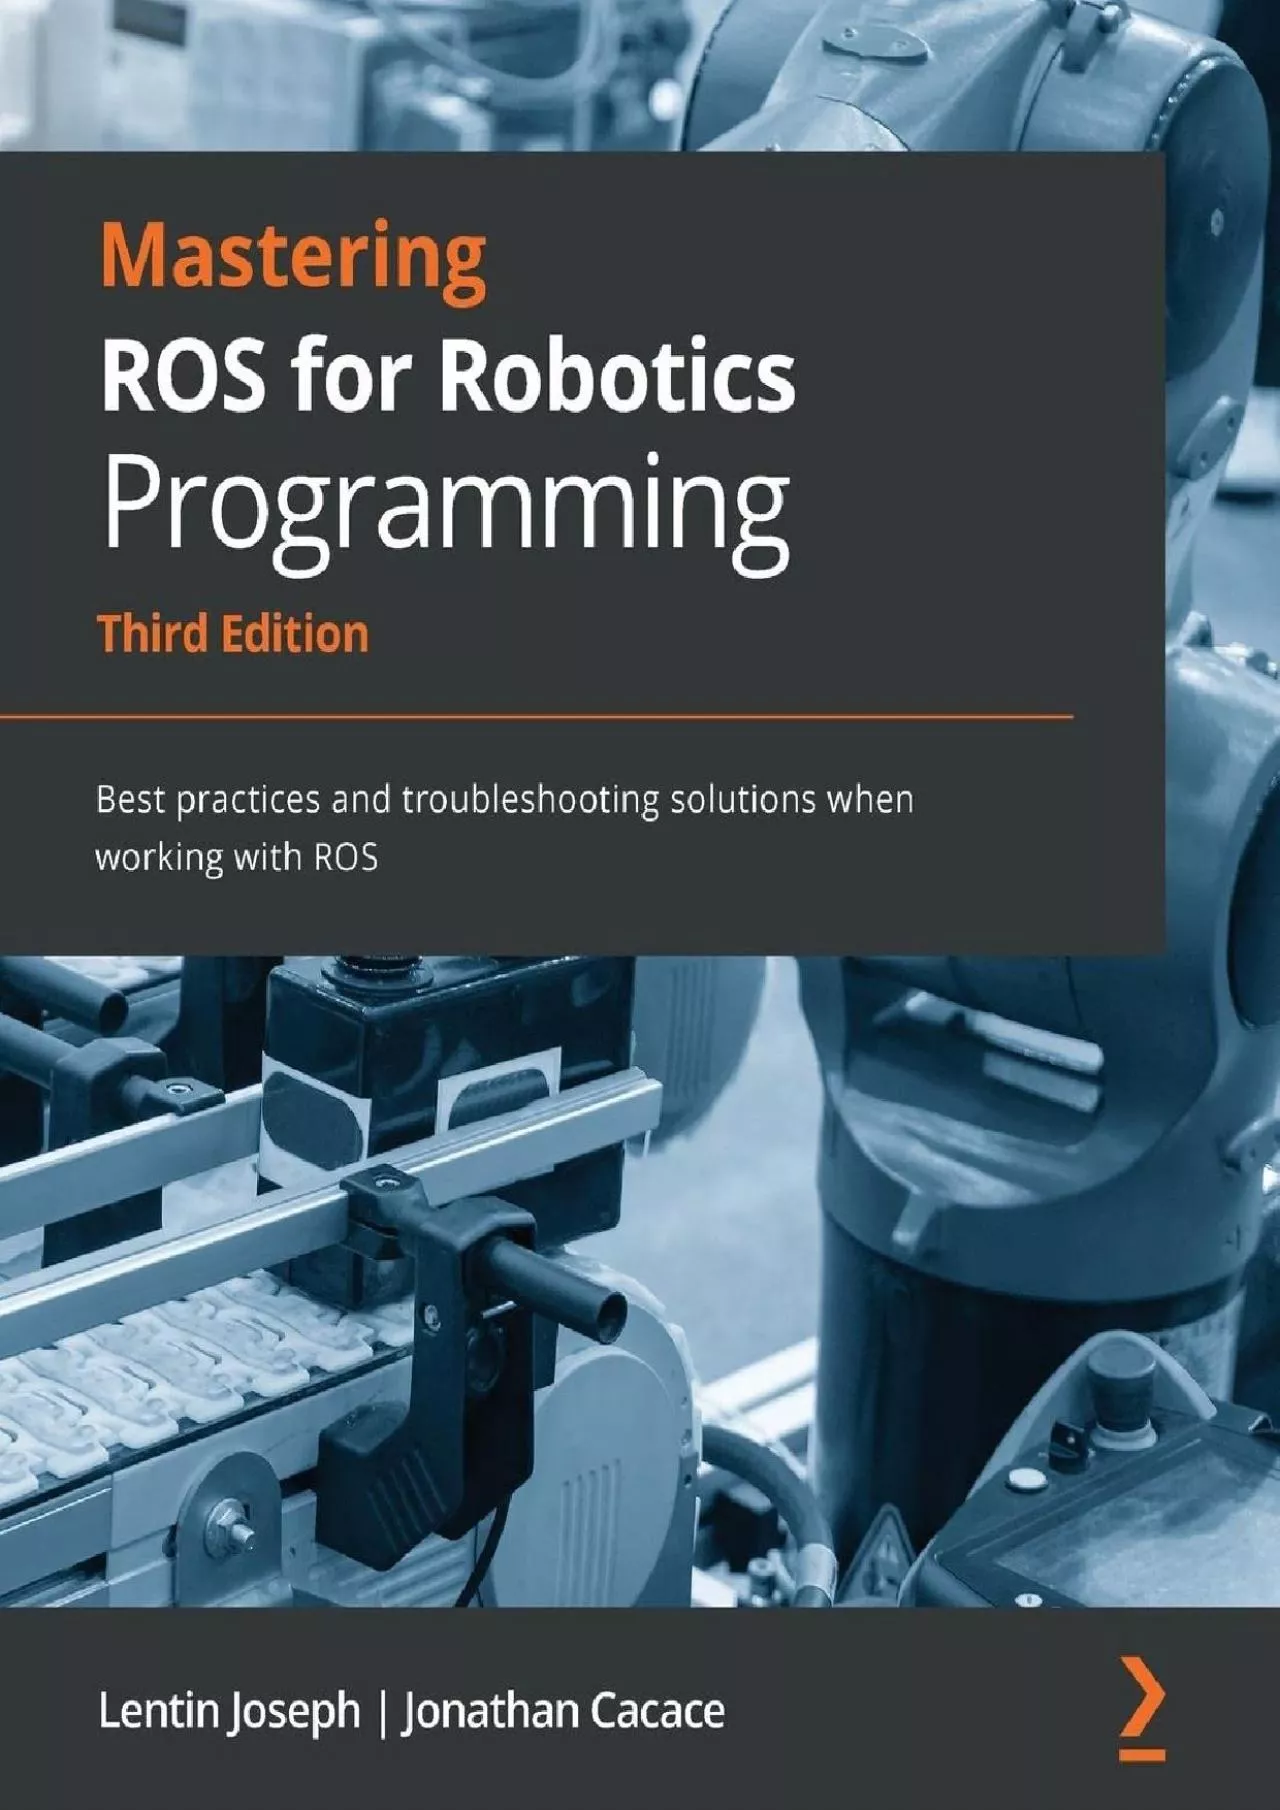 [FREE]-Mastering ROS for Robotics Programming: Best practices and troubleshooting solutions